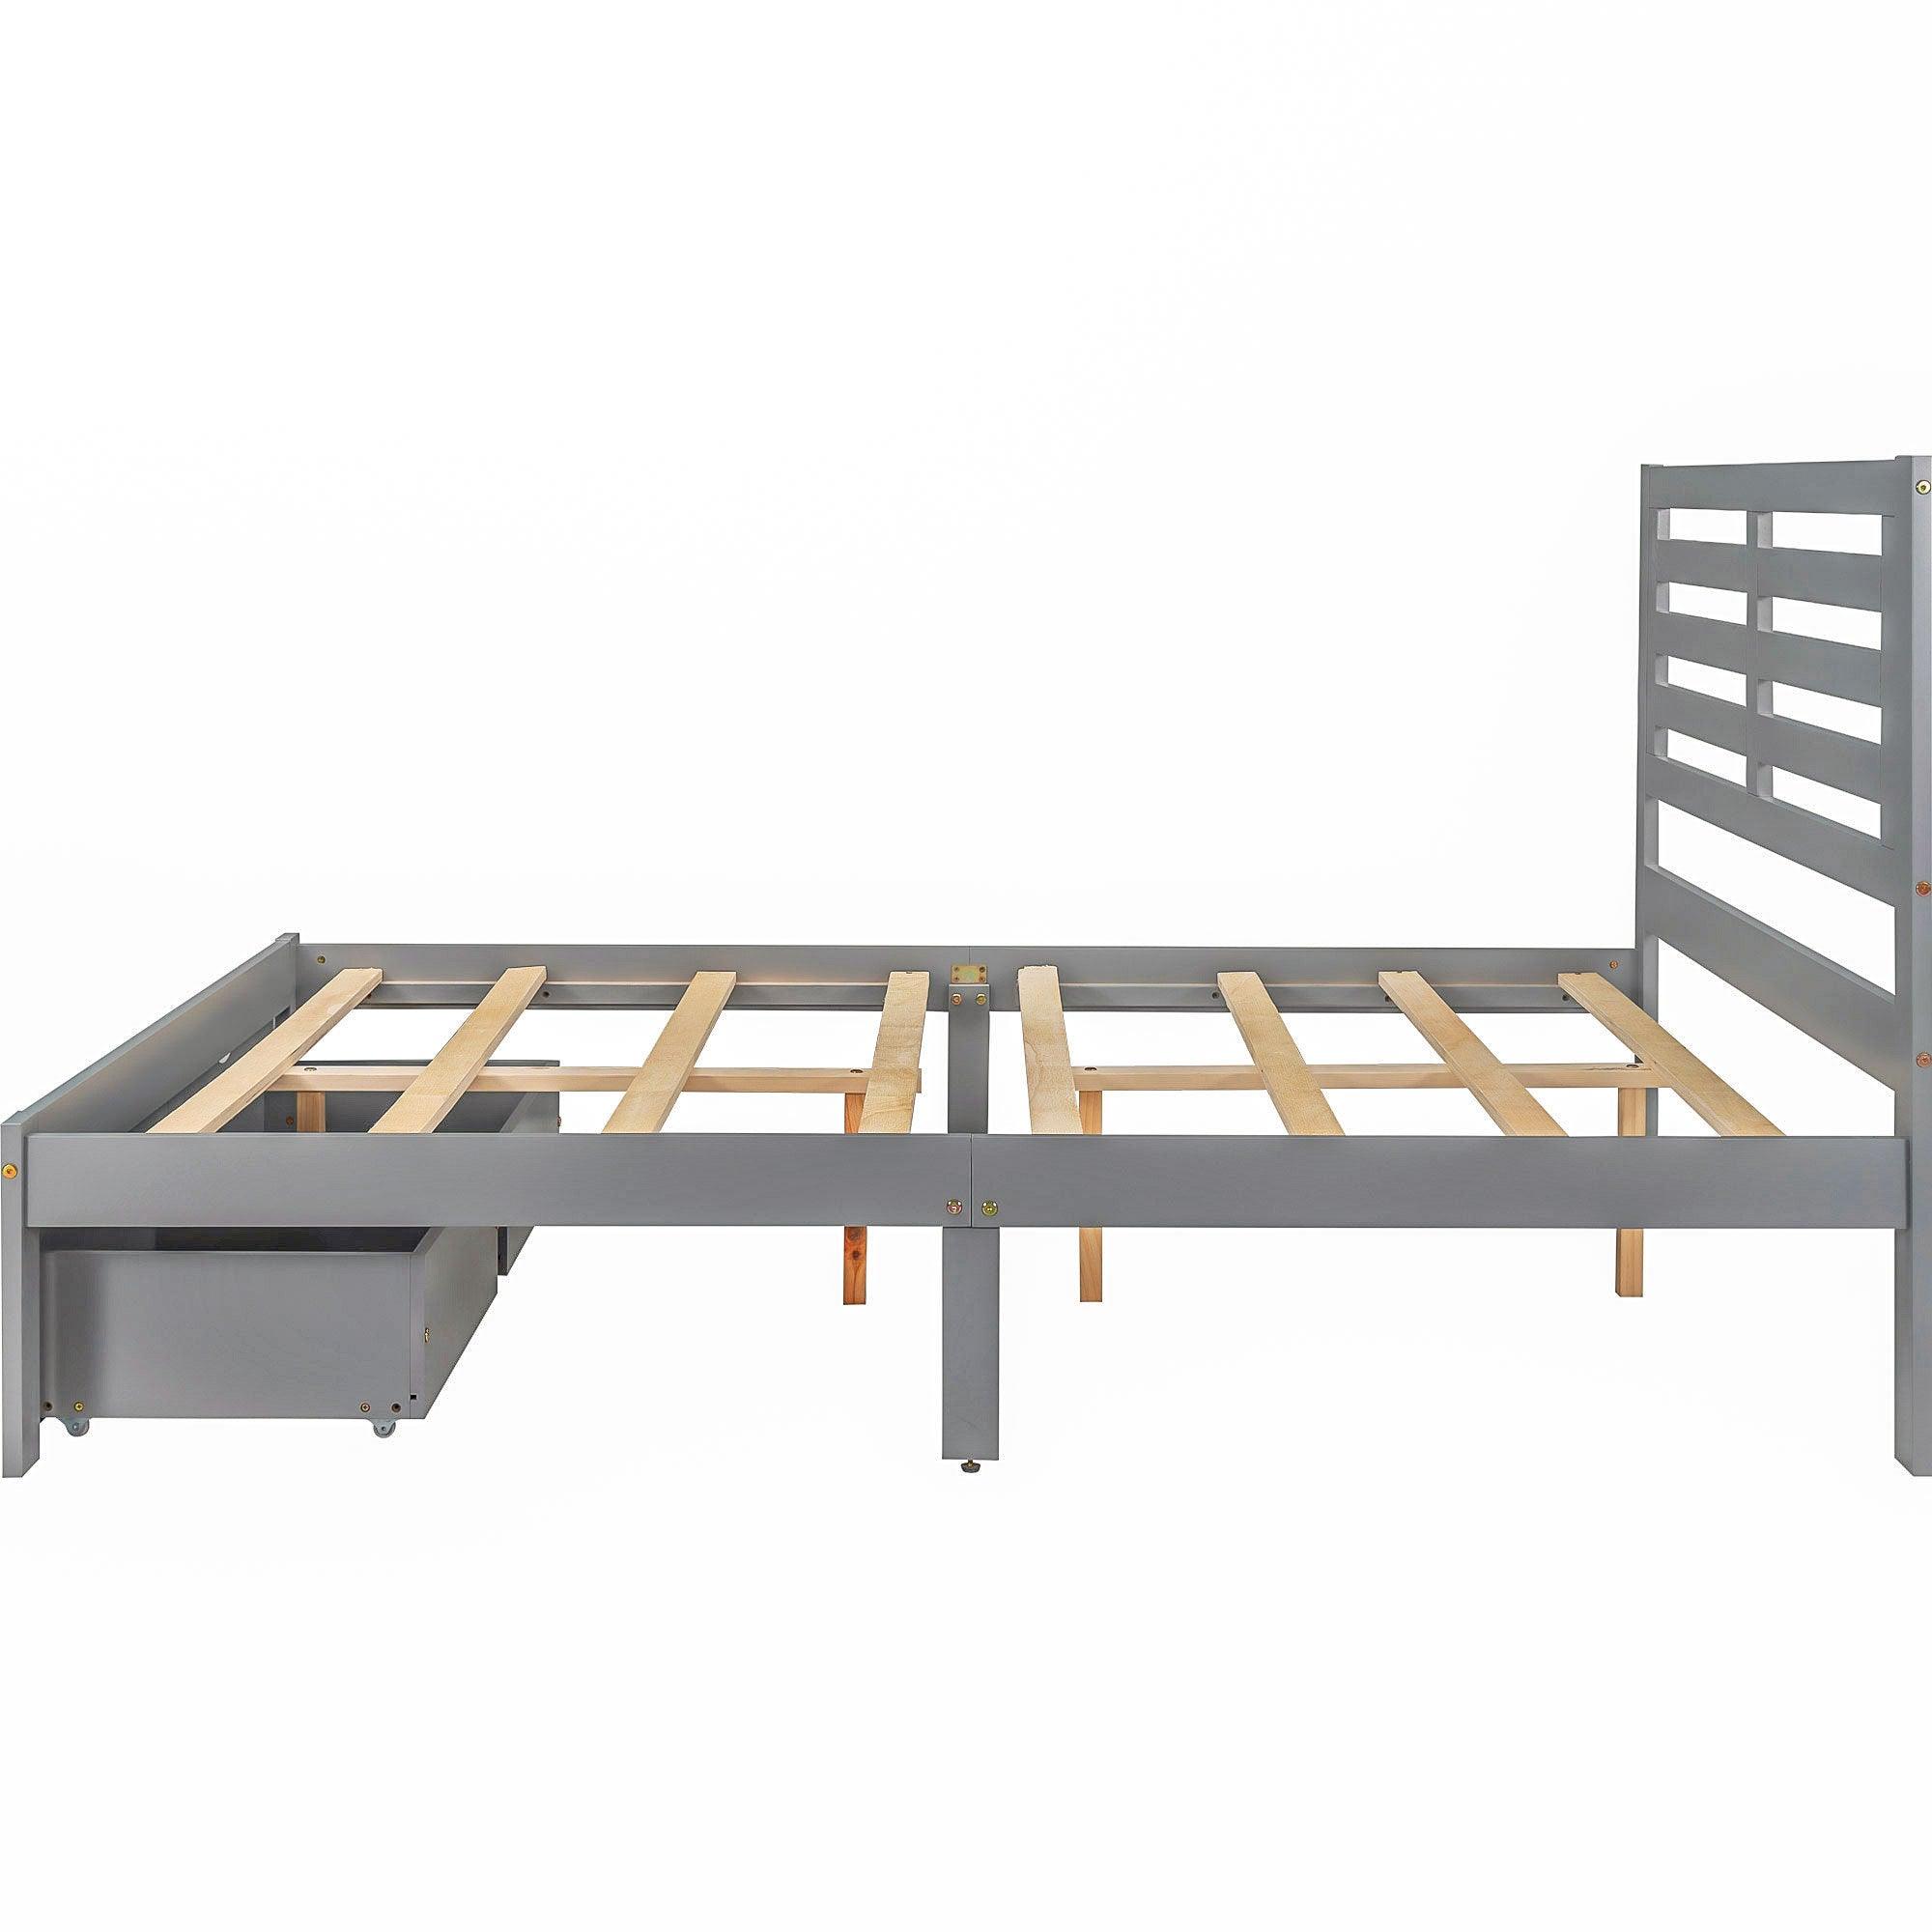 Full Size Platform Bed With 2 Drawers, Gray